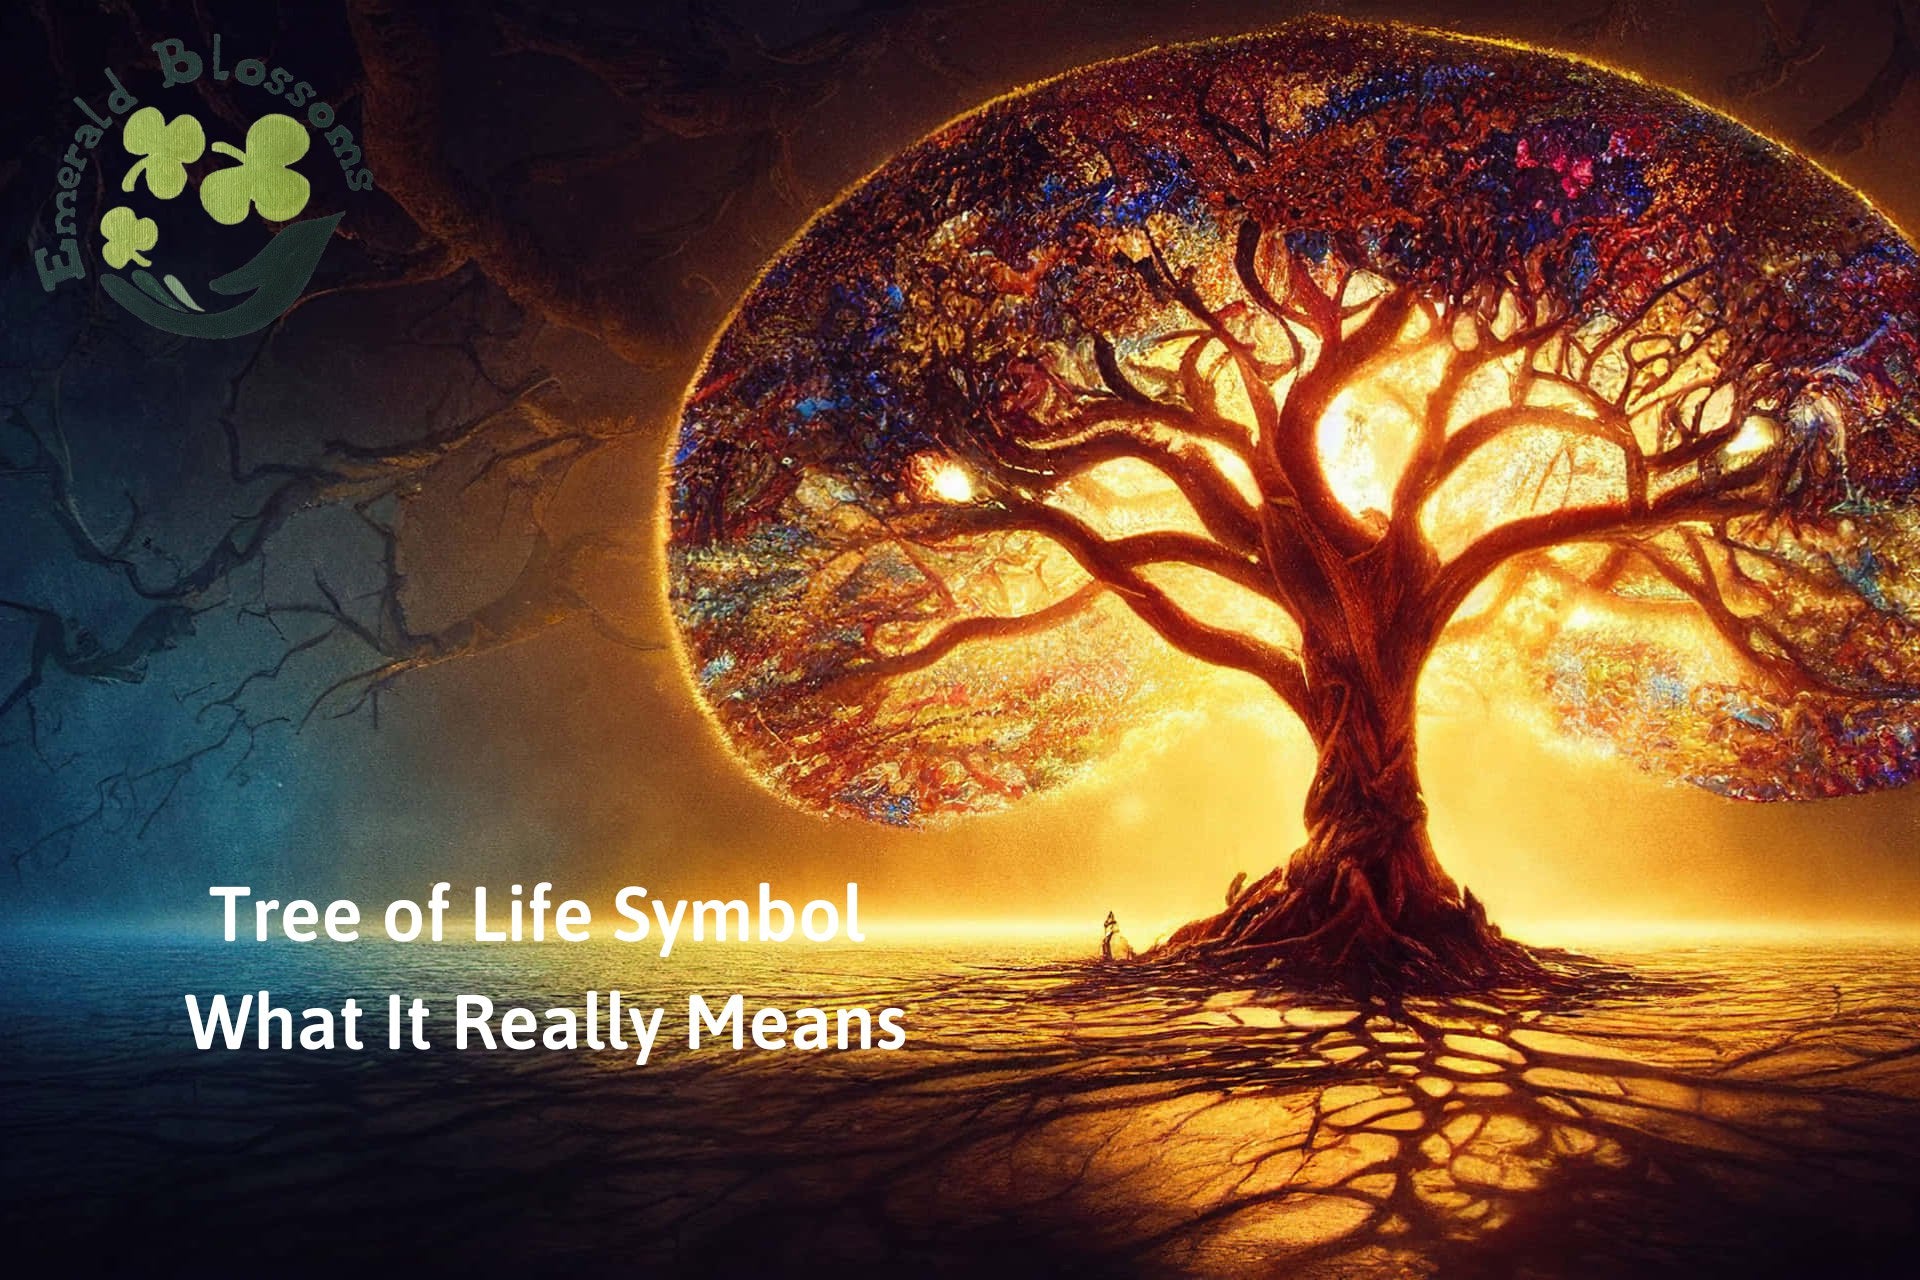 Tree of Life Symbol – What It Really Means